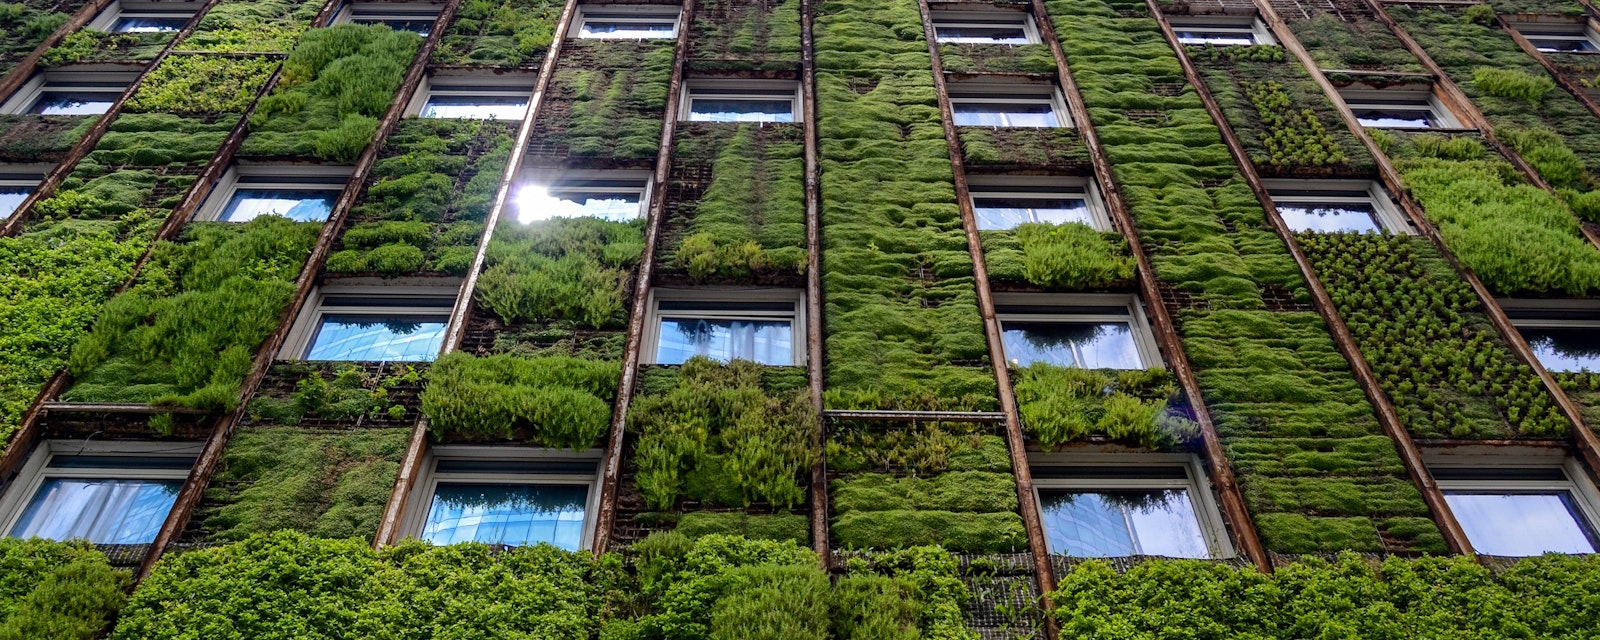 Wall,Of,High-rise,Building,Covered,With,Plants,,Reflection,Of,Sunlight